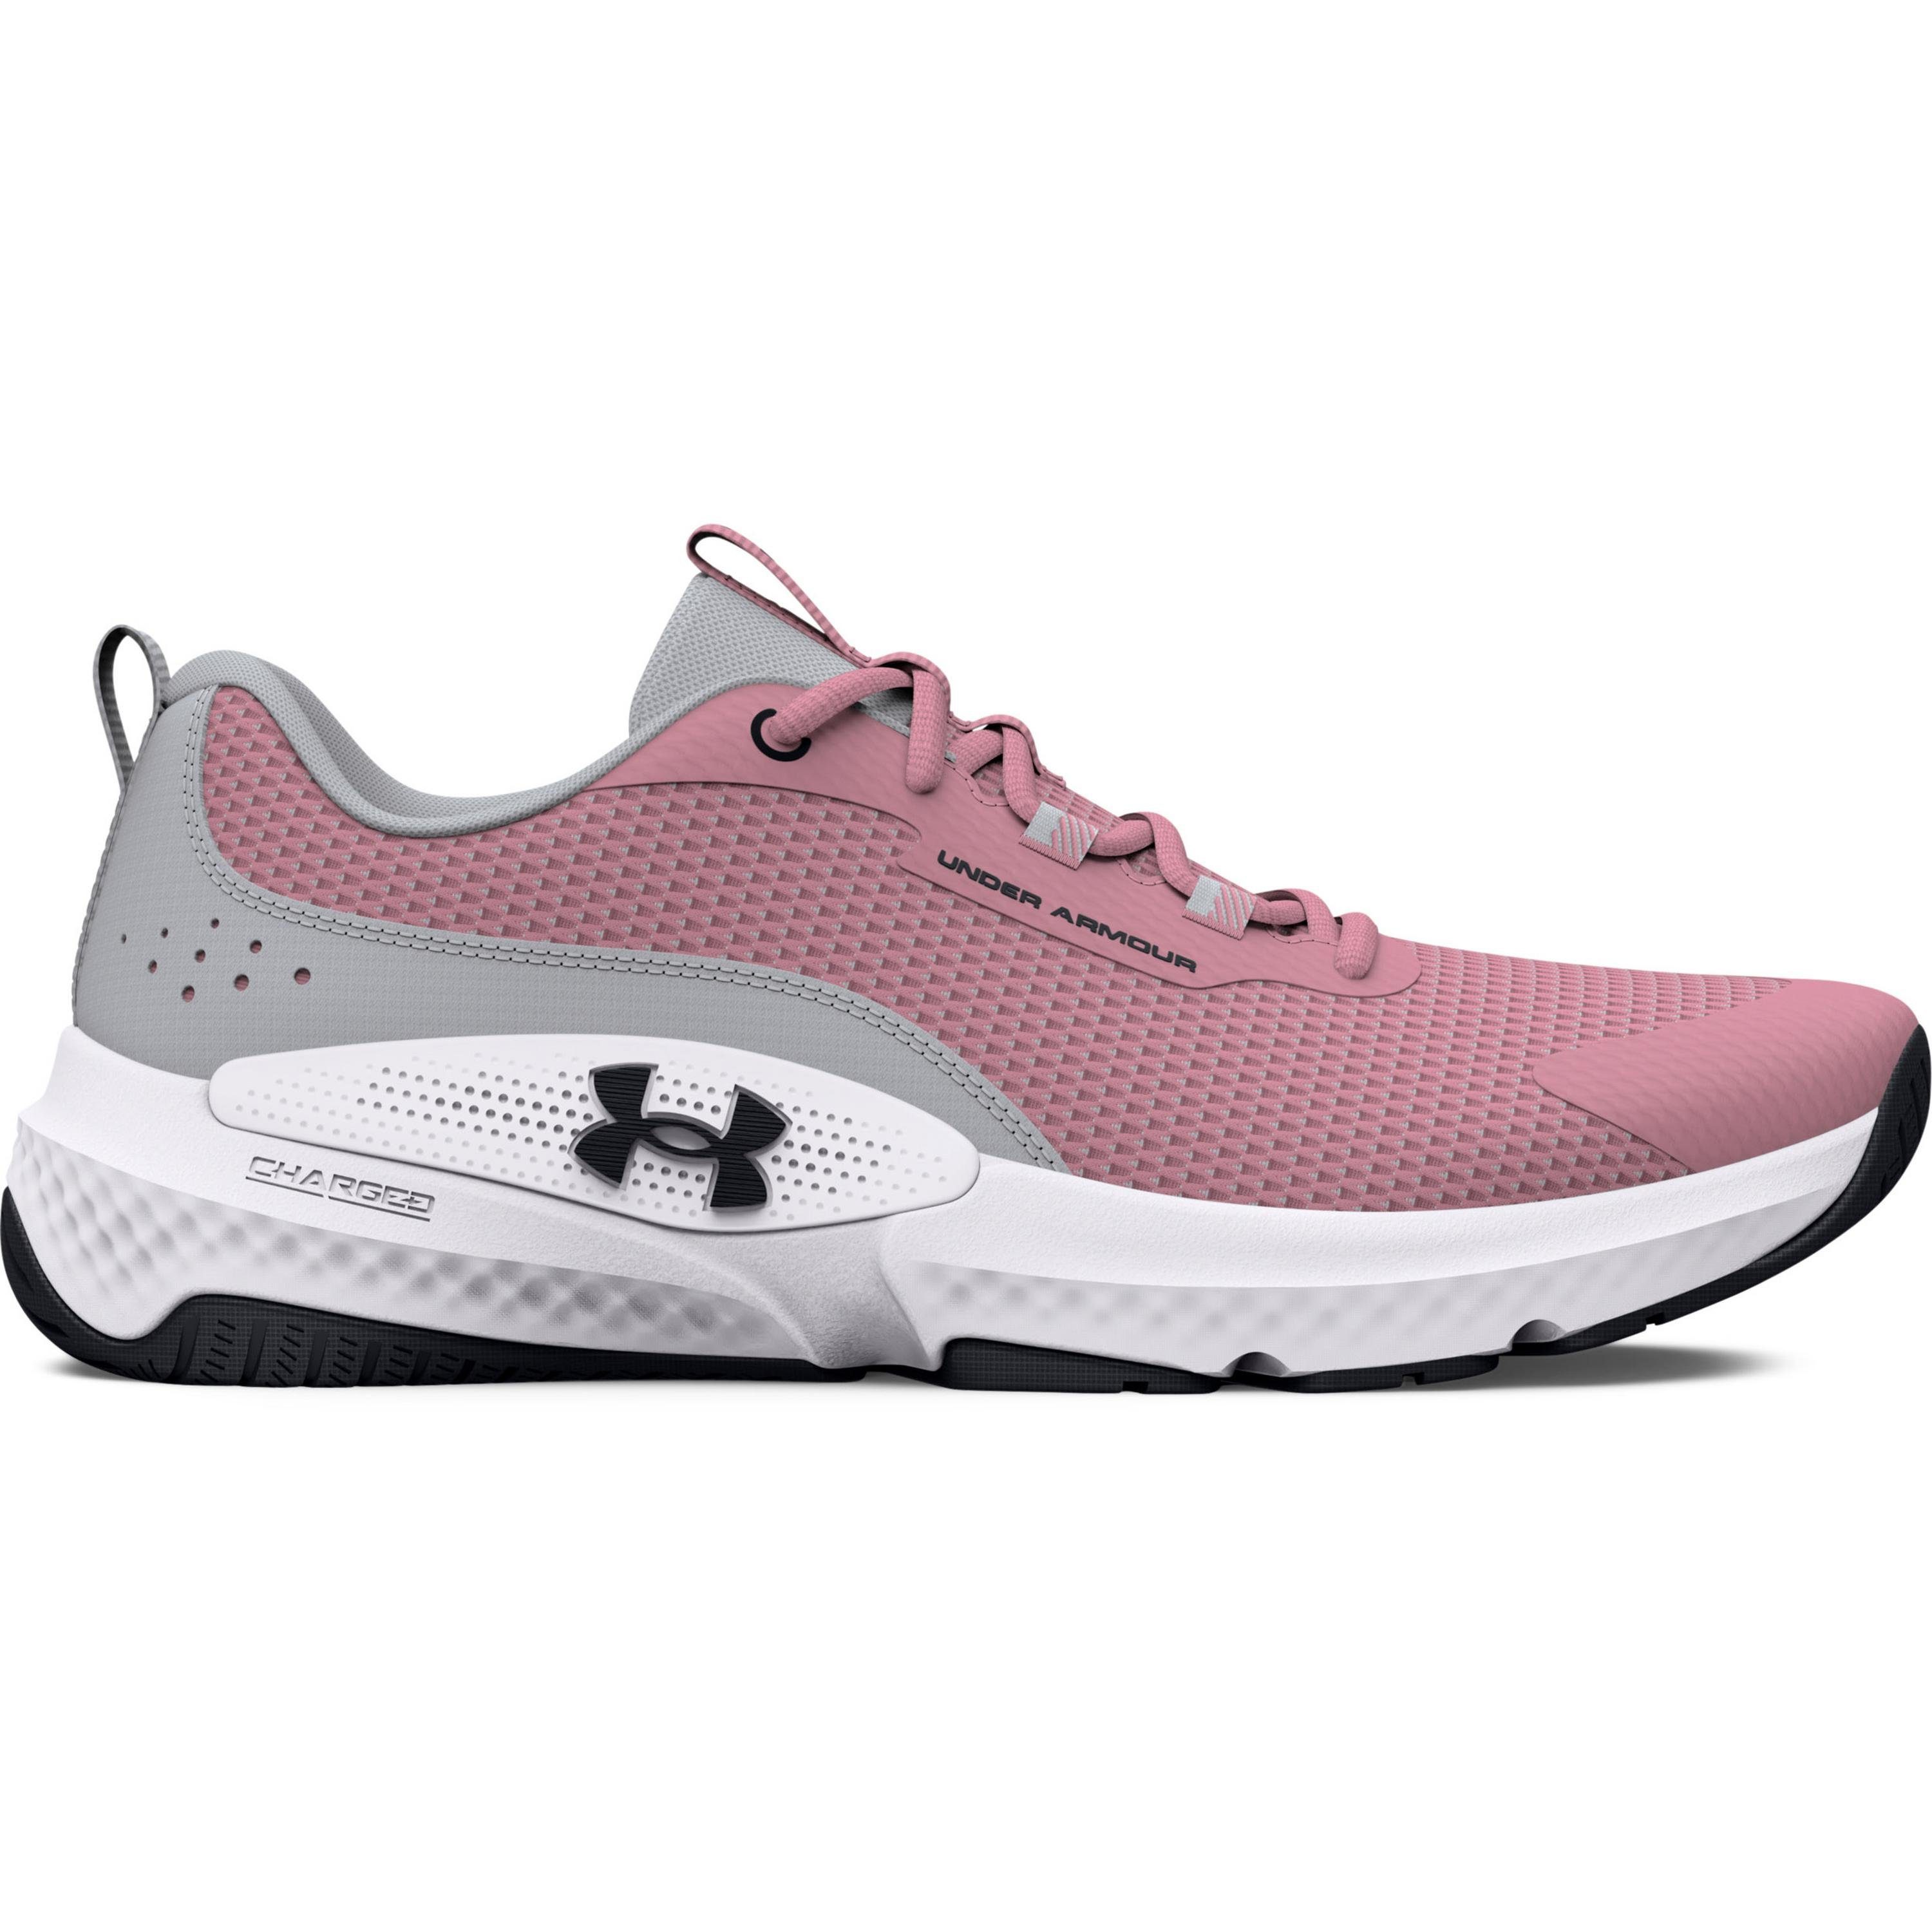 Under Armour® Dynamic Select Fitnessschuh pink elixir